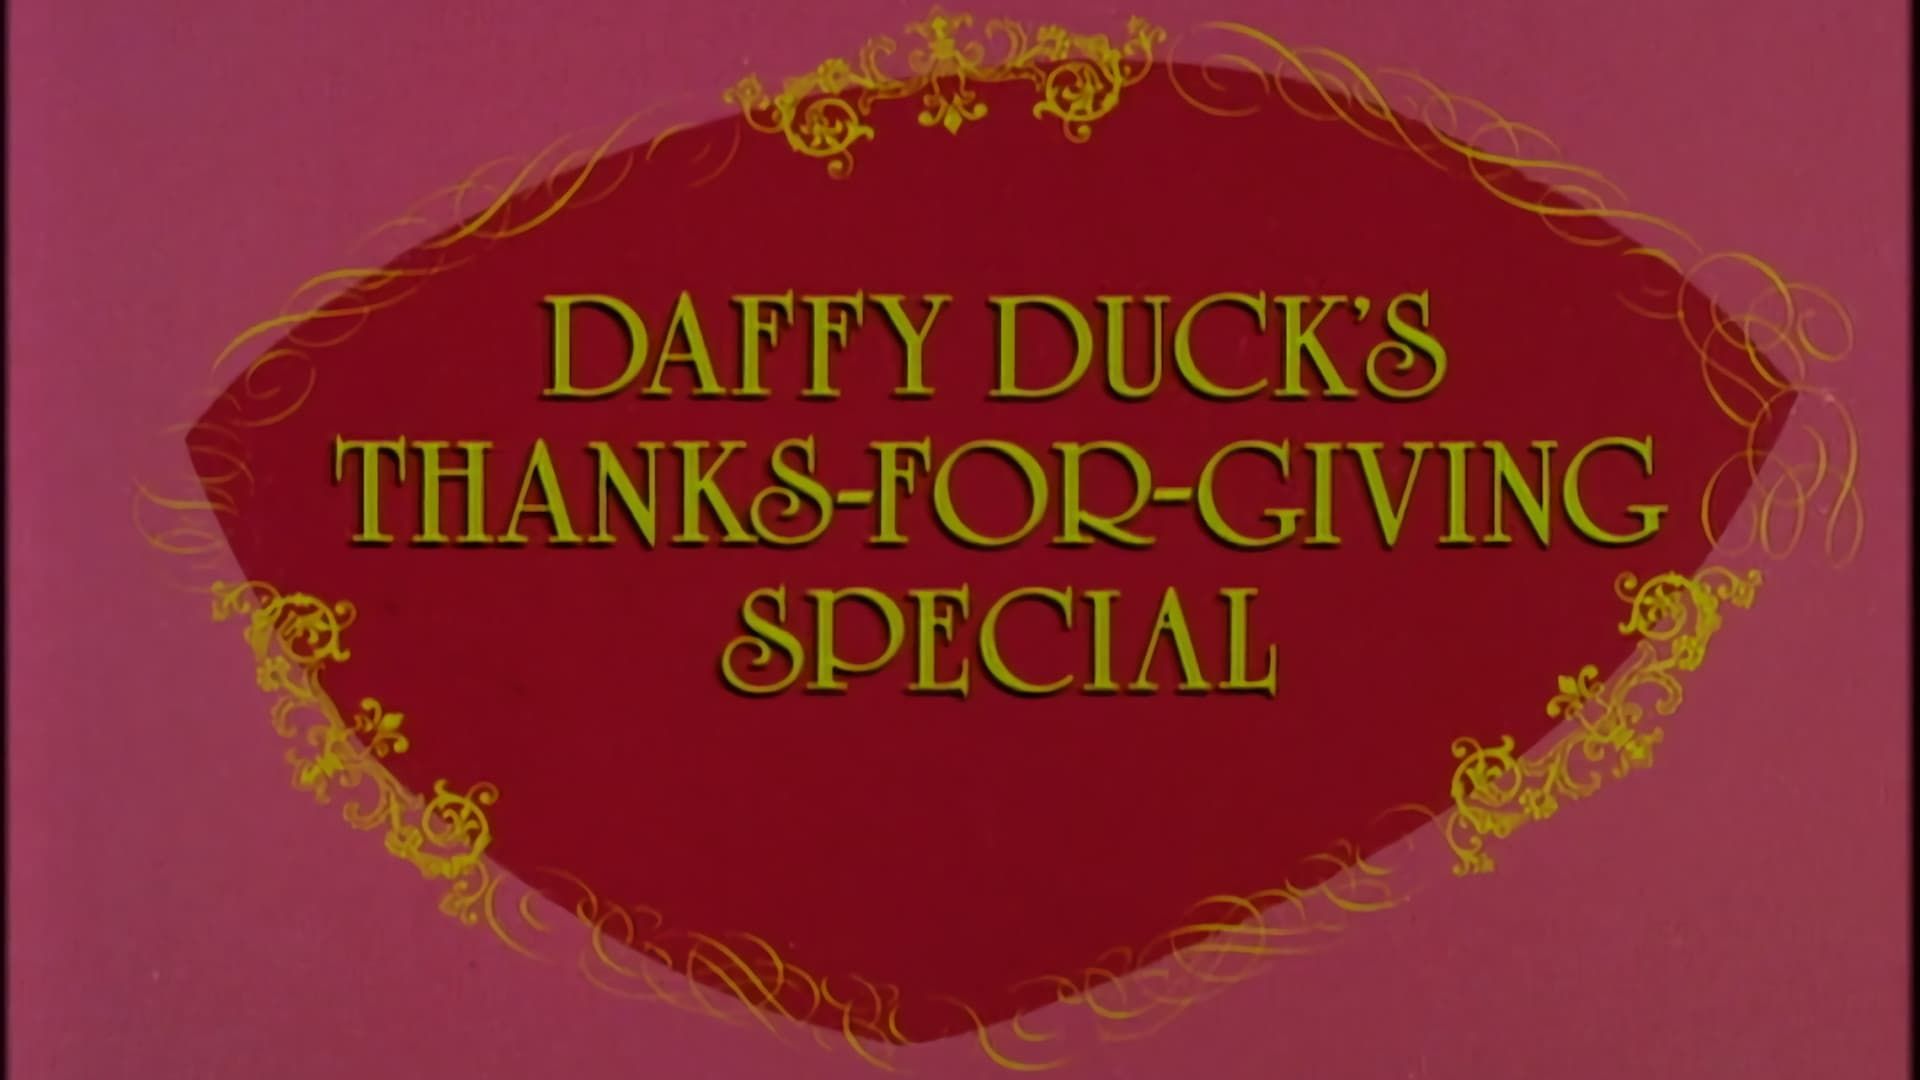 Cubierta de Daffy Duck's Thanks-for-Giving Special